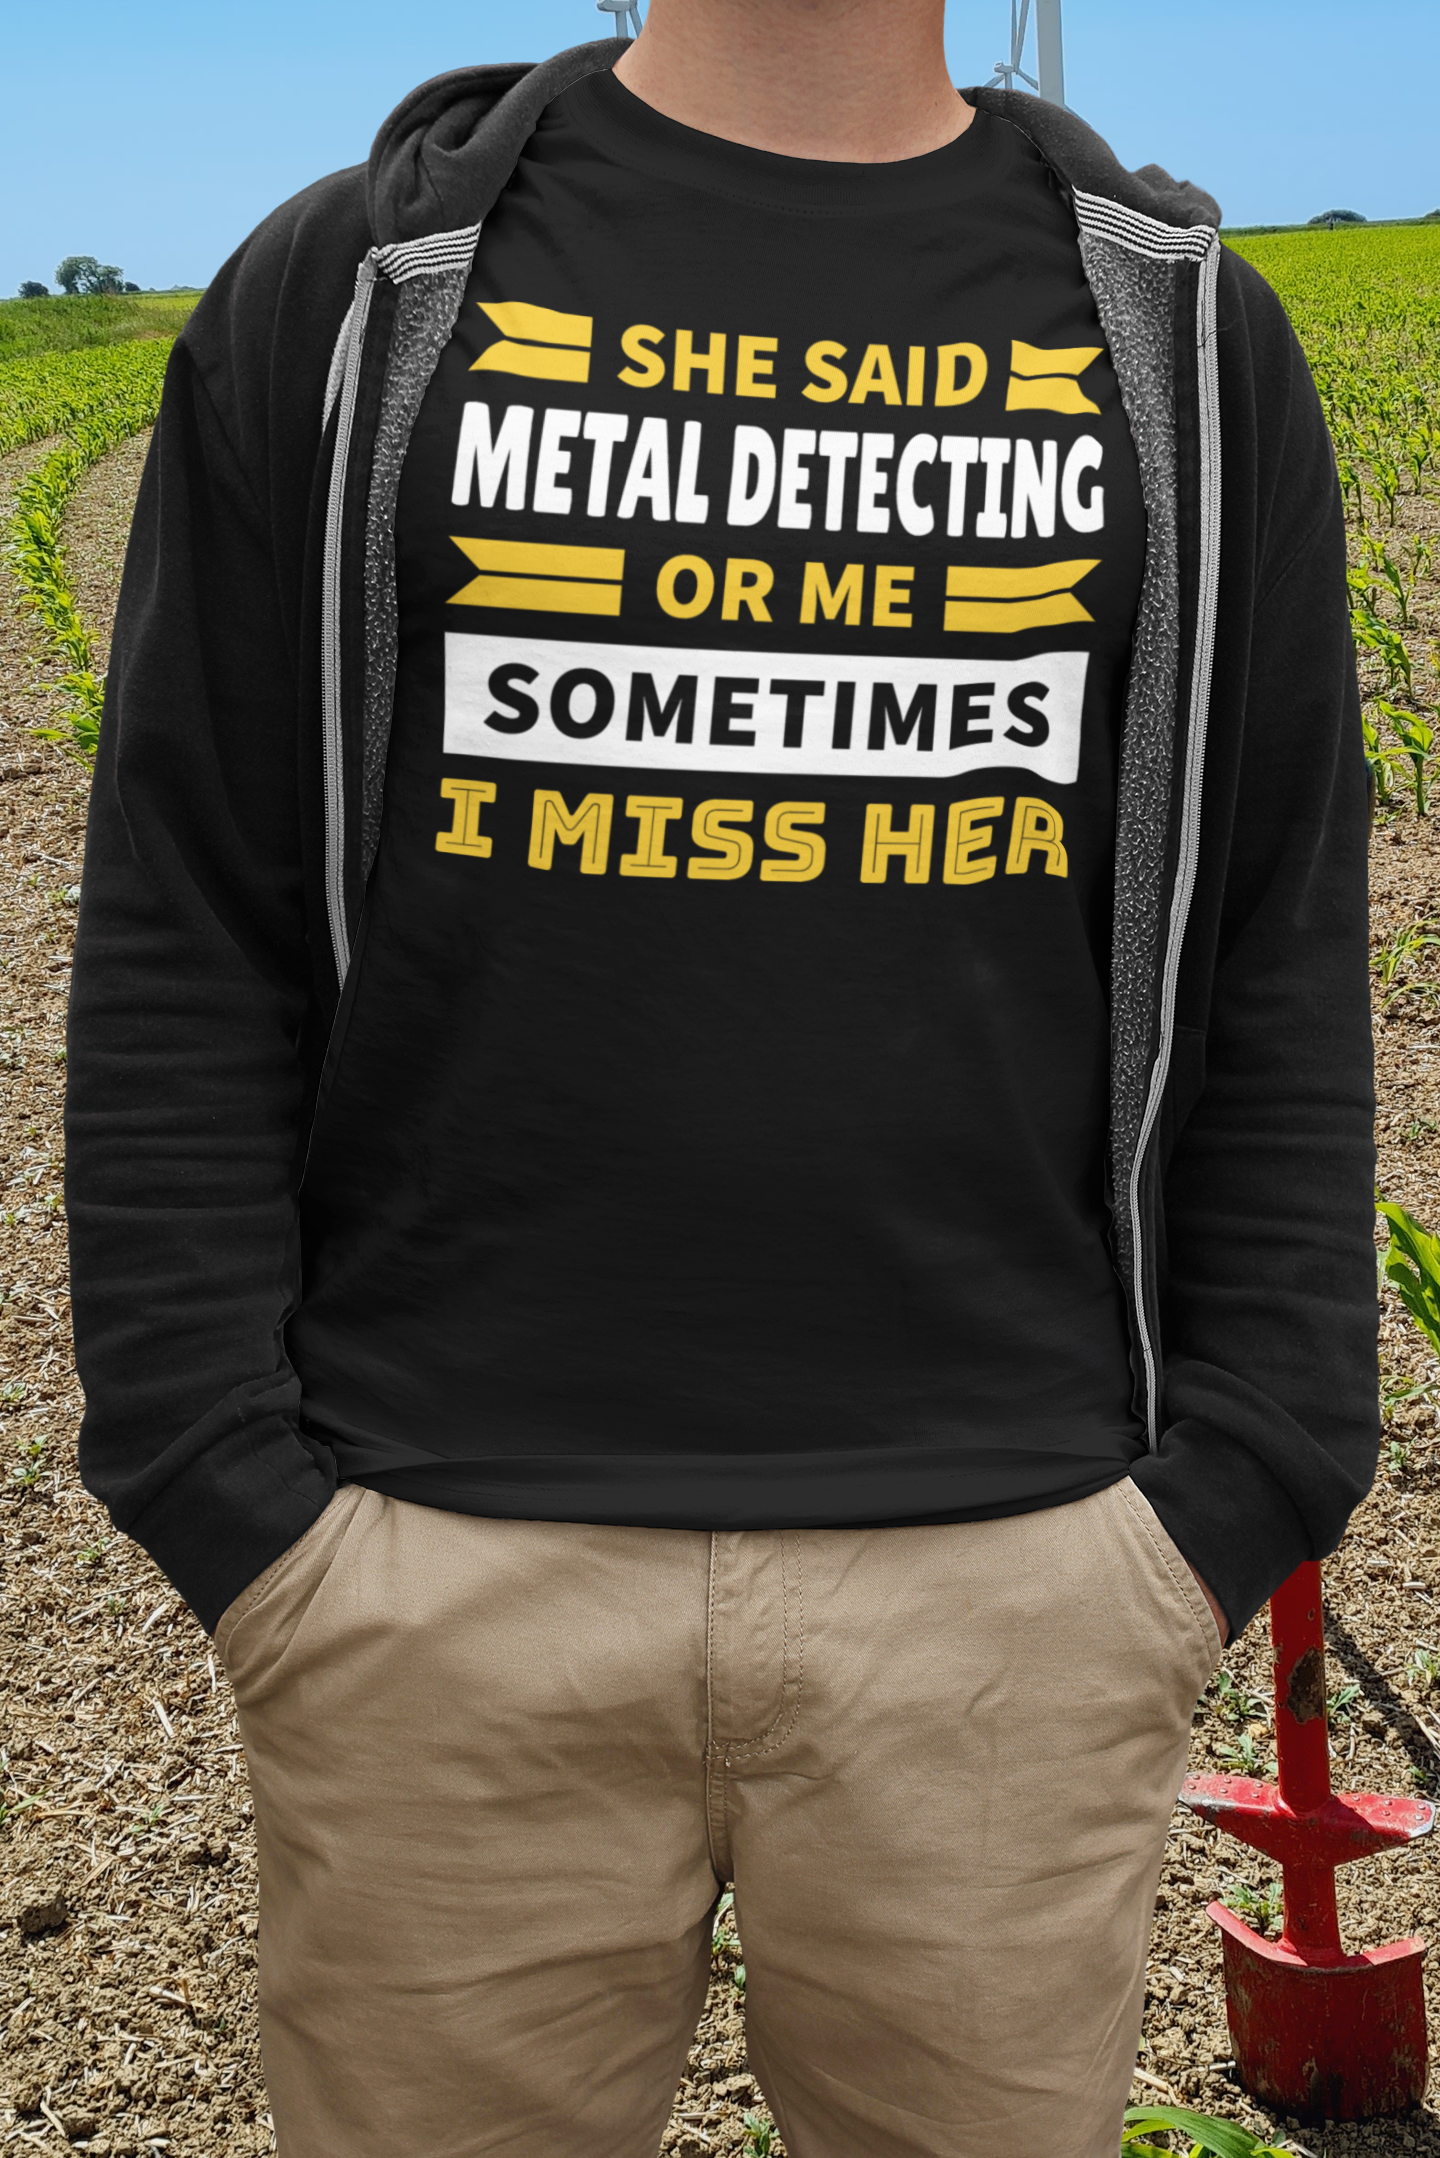 She said metal detecting or me sometimes I miss her